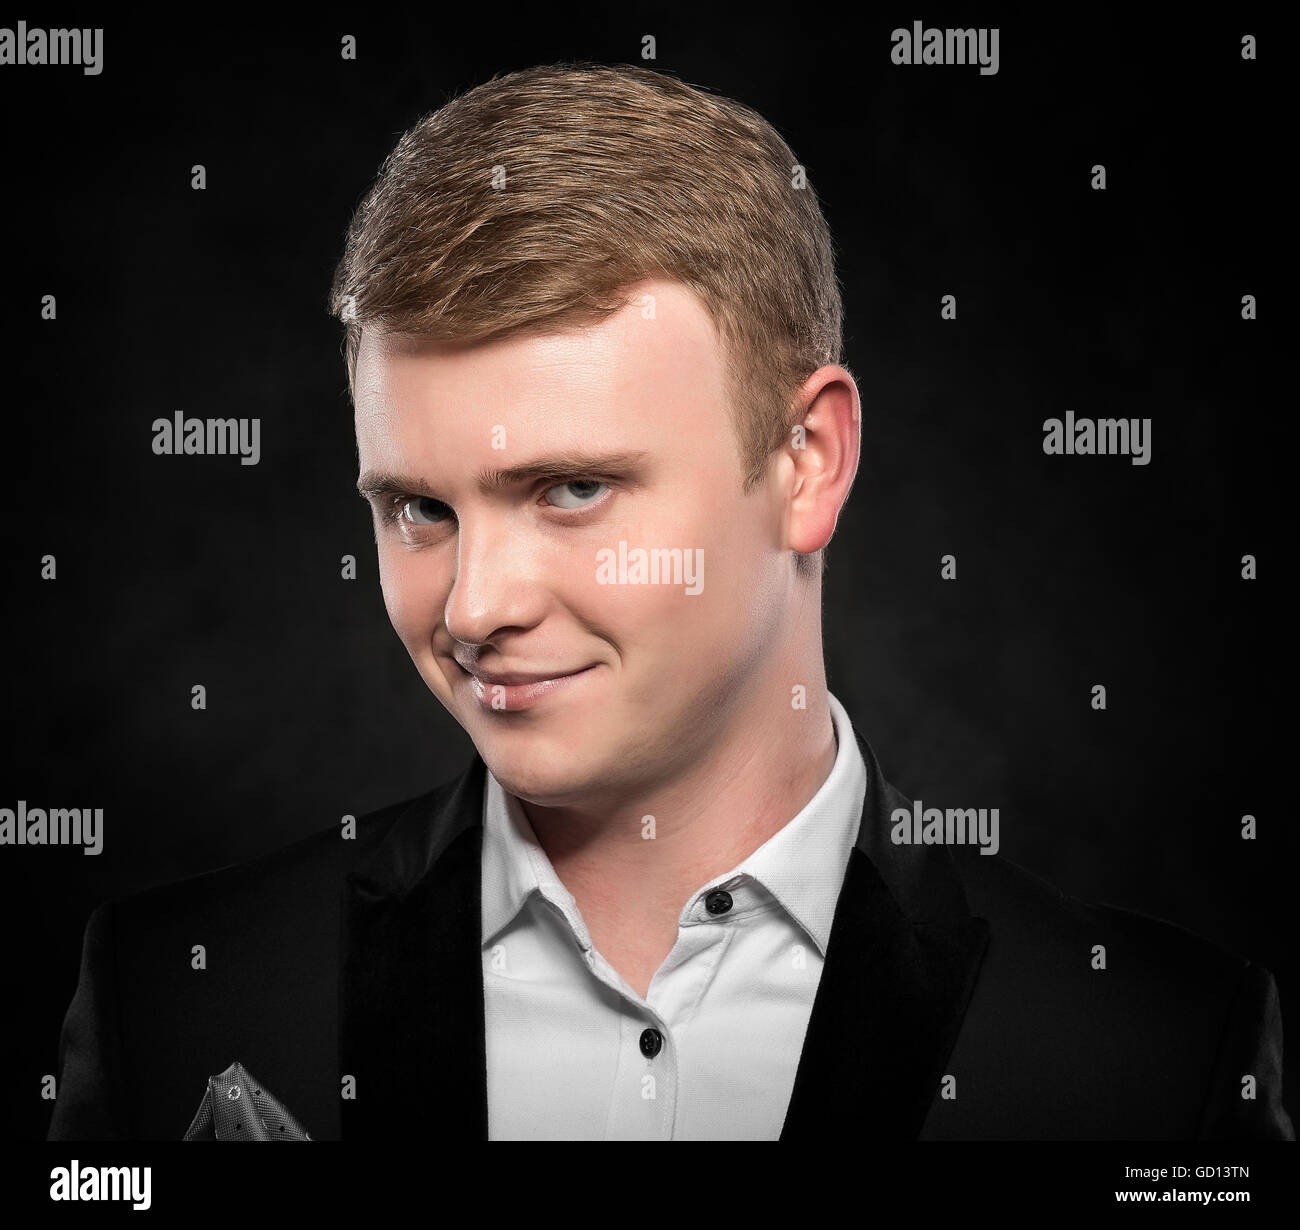 Portrait of a funny man over dark background. Stock Photo